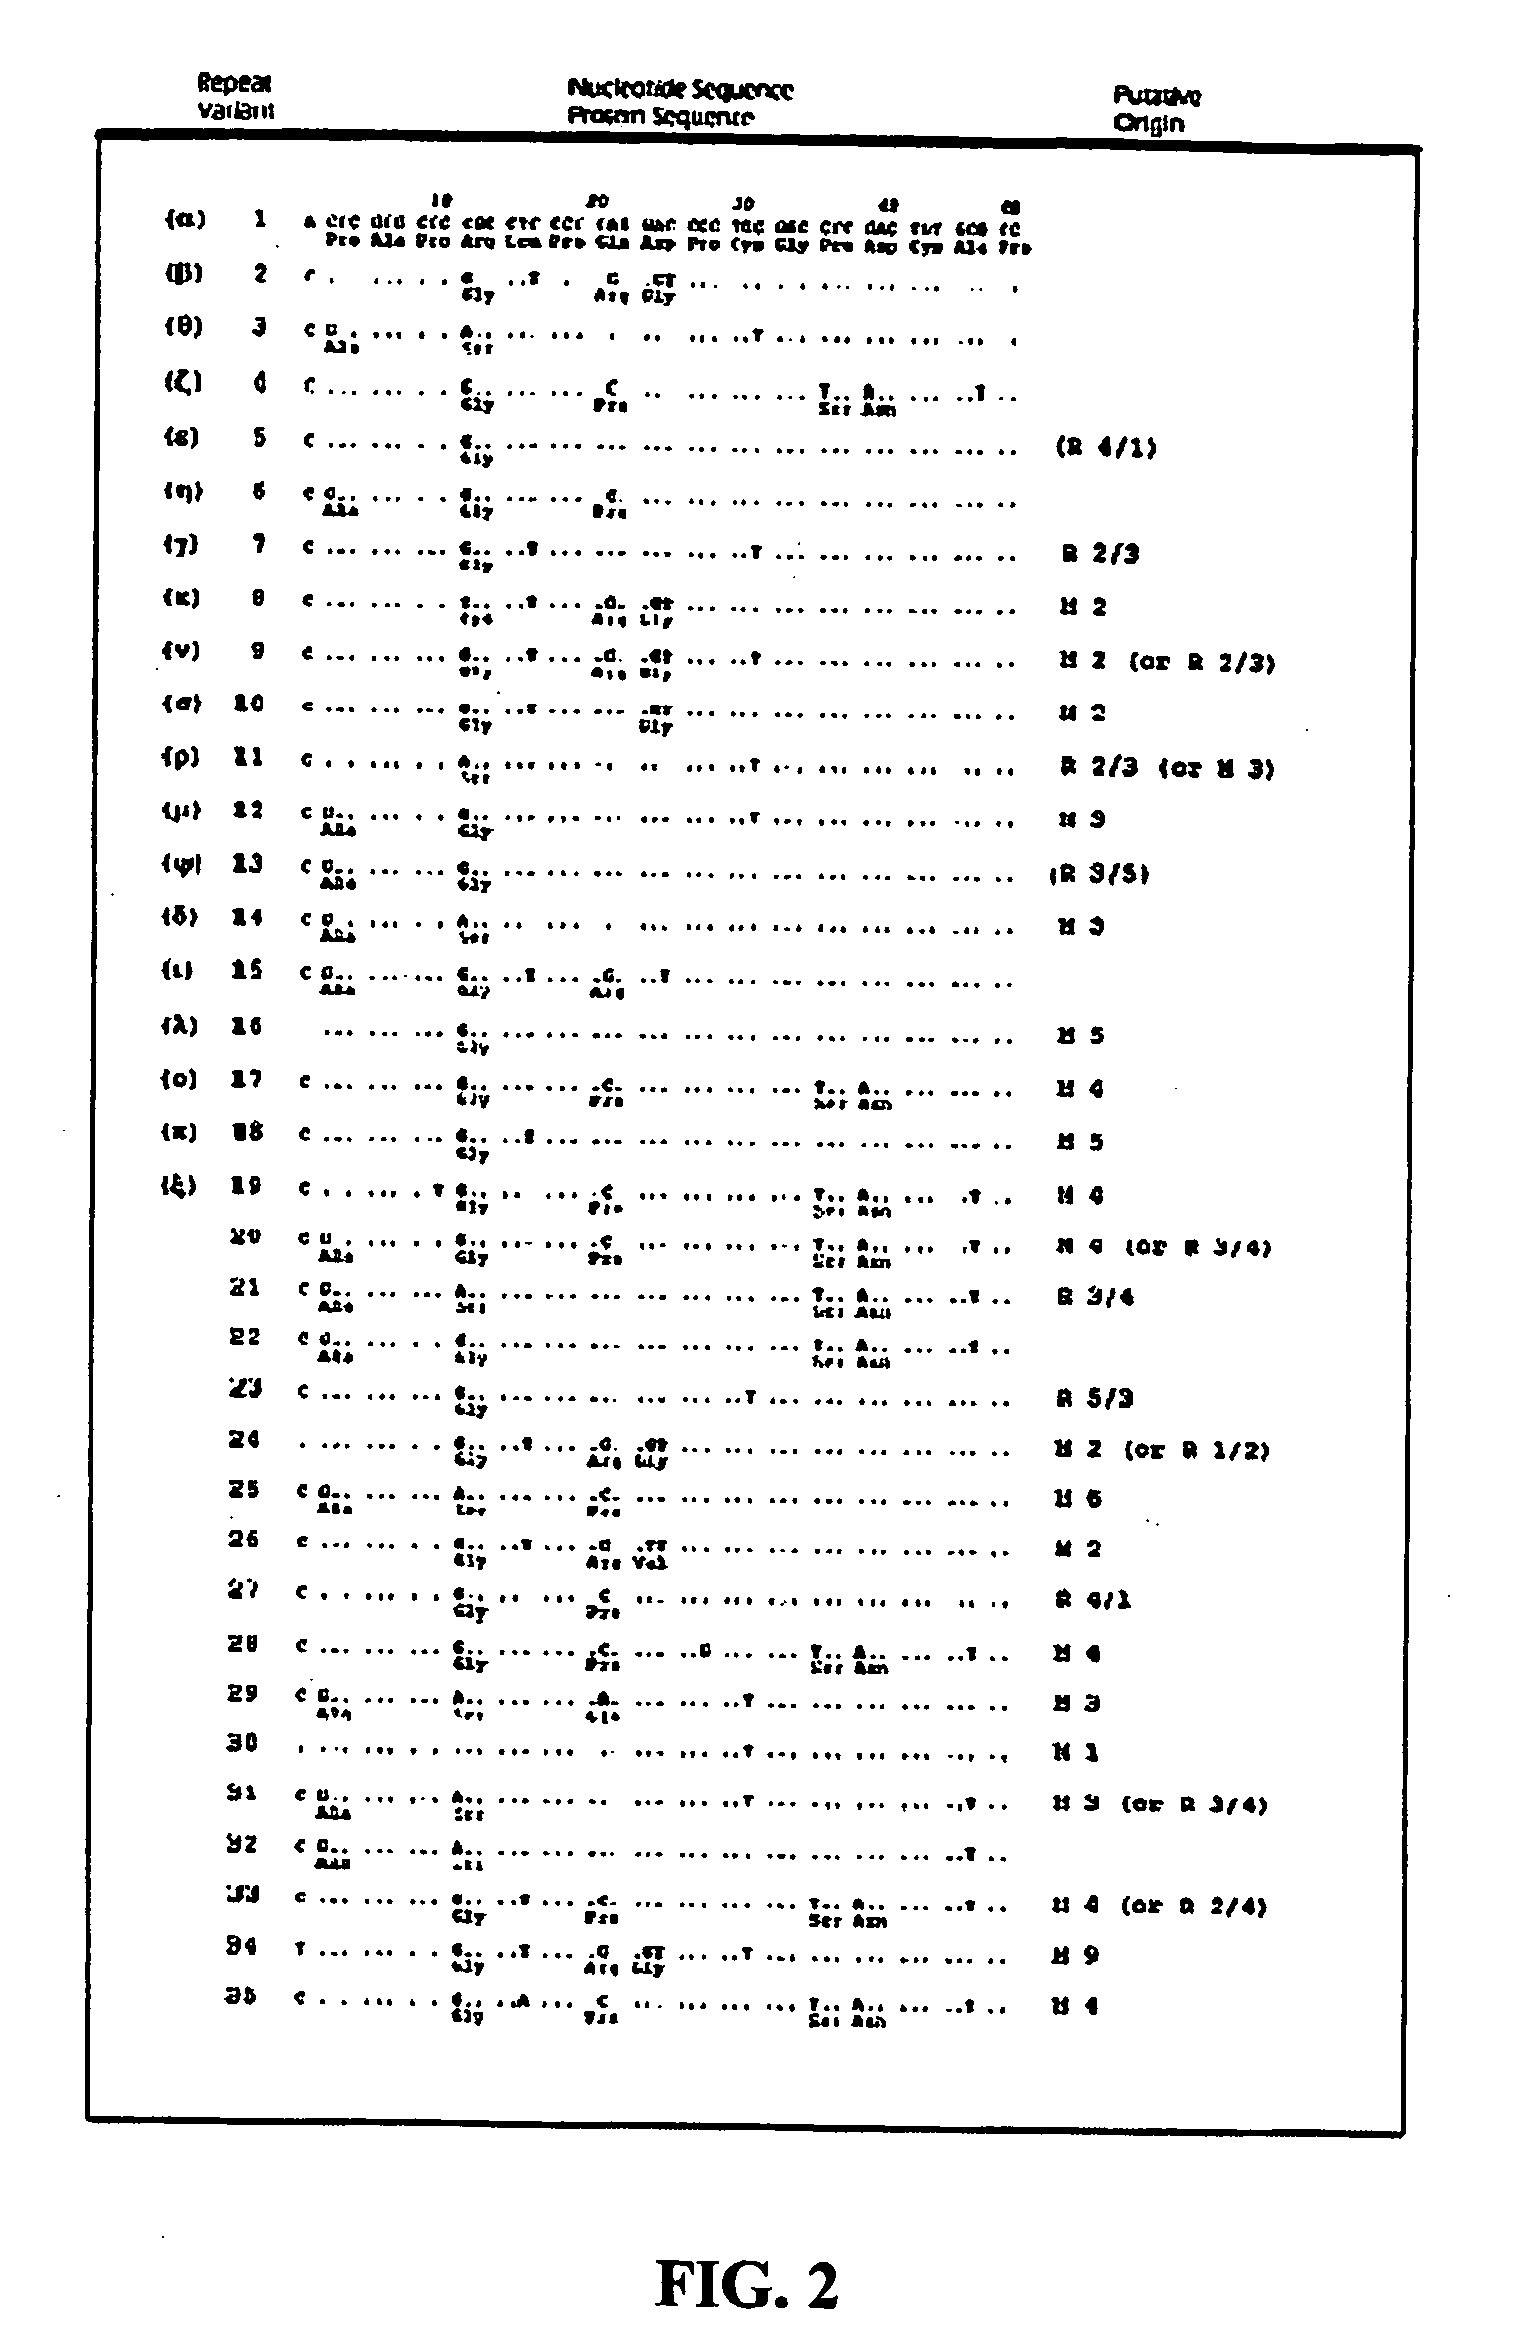 Reagents and methods for diagnosis of attention deficit hyperactivity disorder